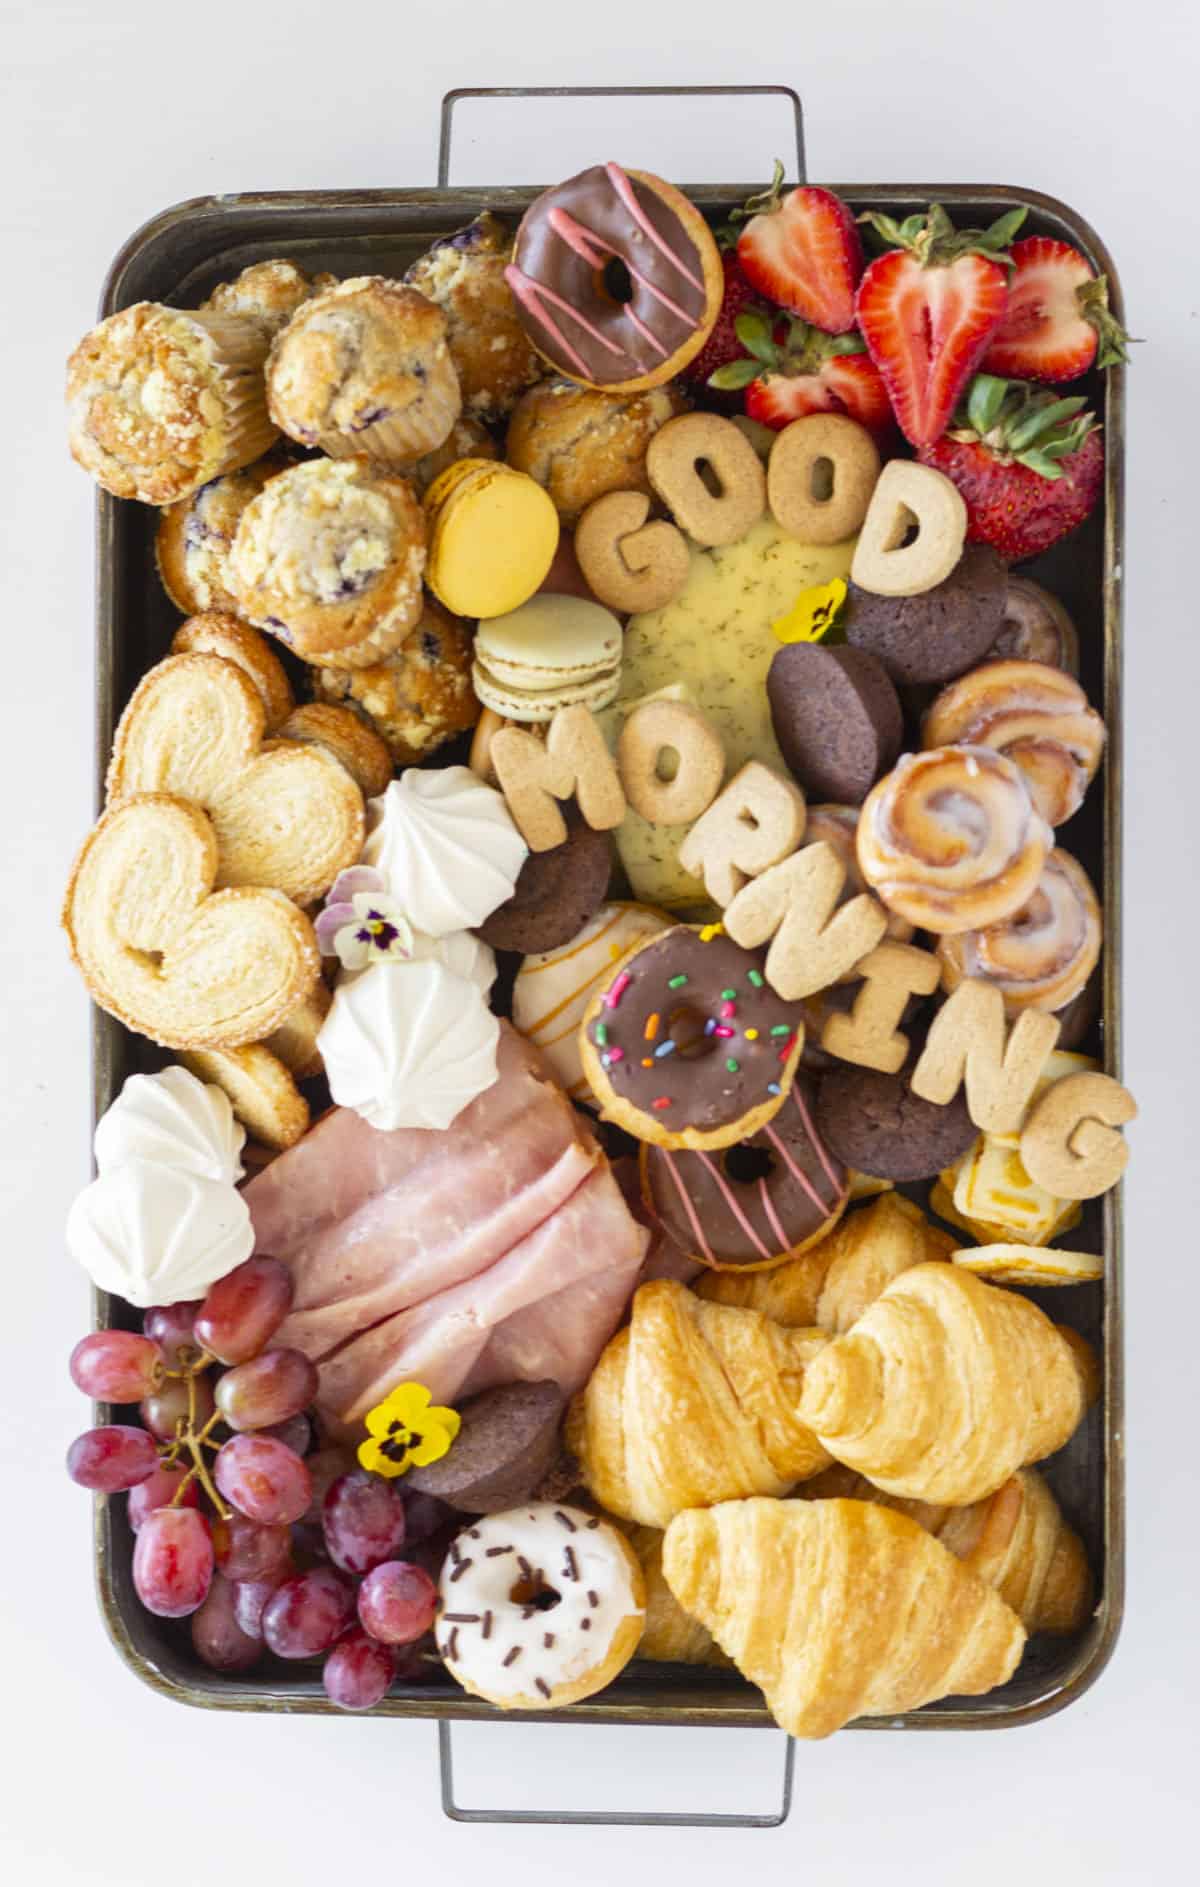 Looking down on a completed breakfast charcuterie board.